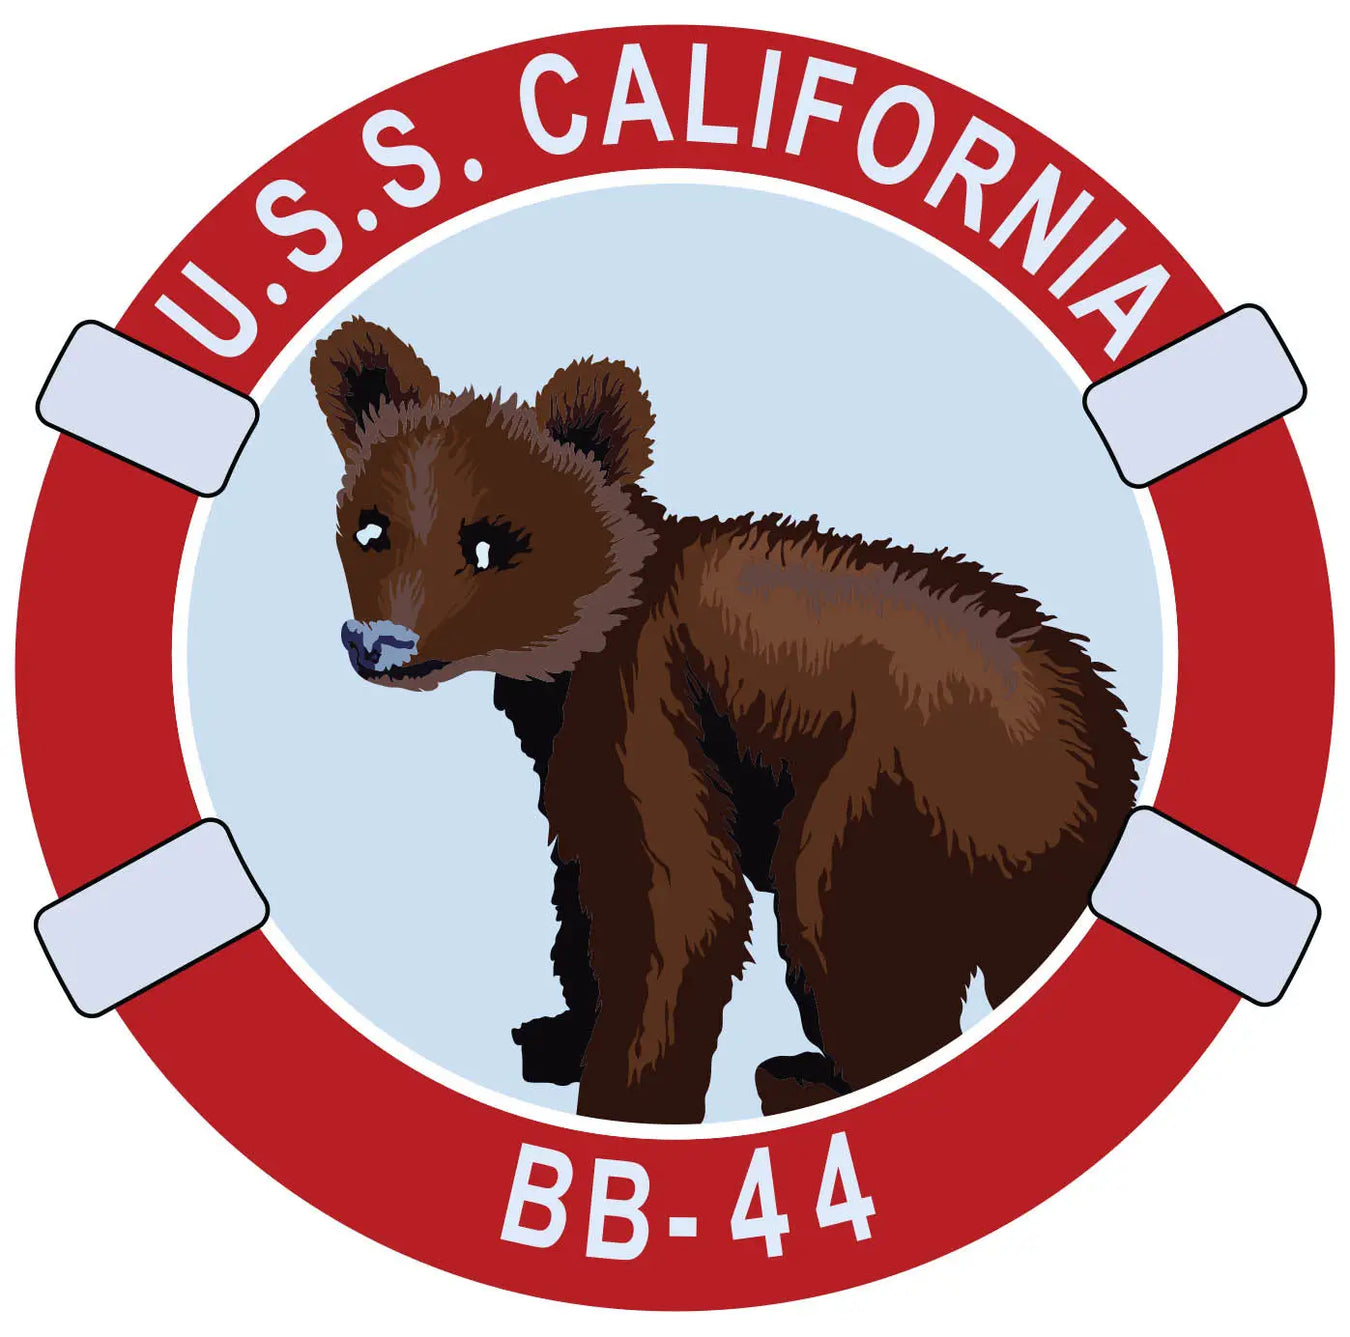 USS California (BB-44) Merchandise - Shop T-Shirts, hoodies, patches, pins, flags, decals, hats and more.